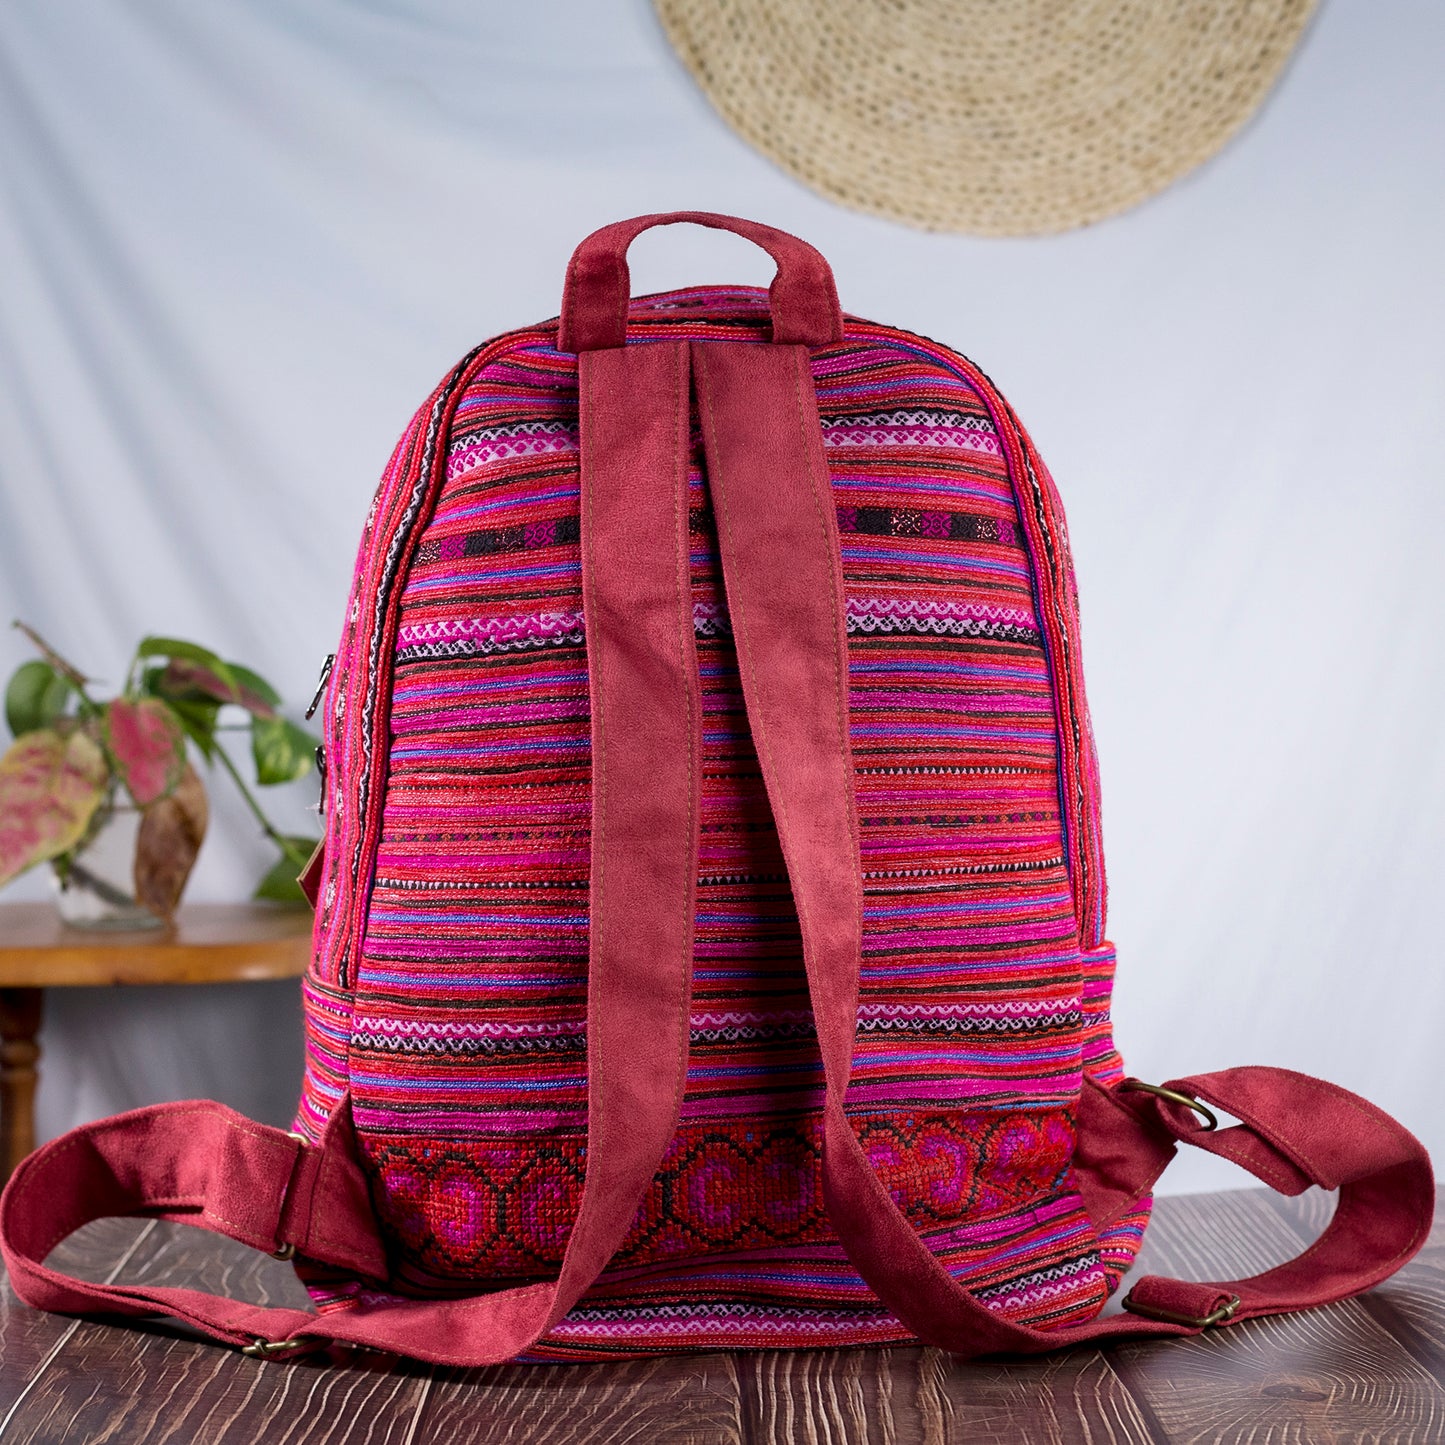 Big-sized backpack, pink hand-embroidery fabric, pink faux leather trim